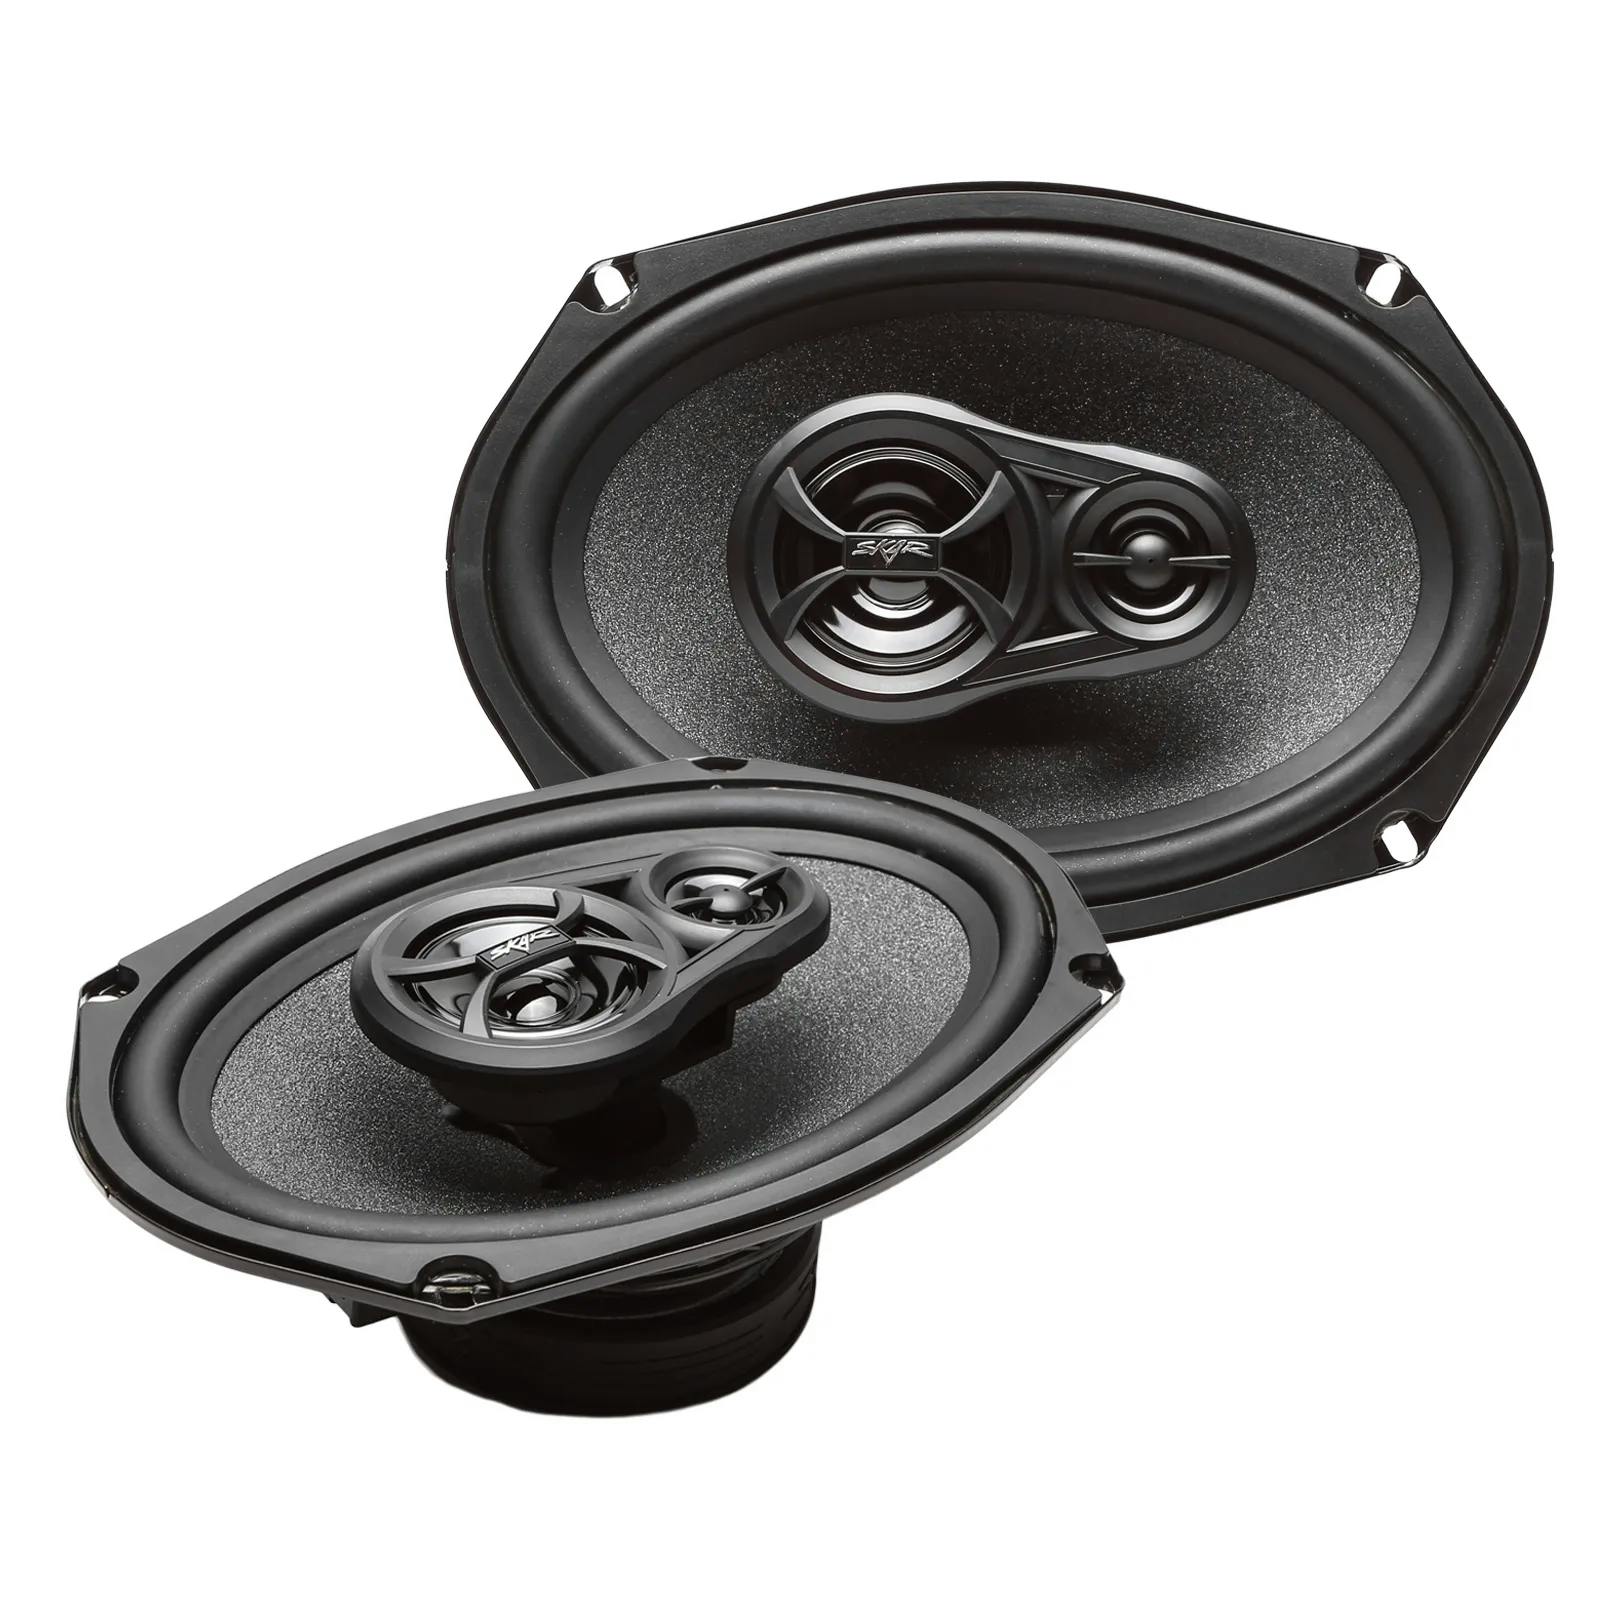 Featured Product Photo for RPX69 | 6" x 9" 270 Watt Coaxial Car Speakers - Pair